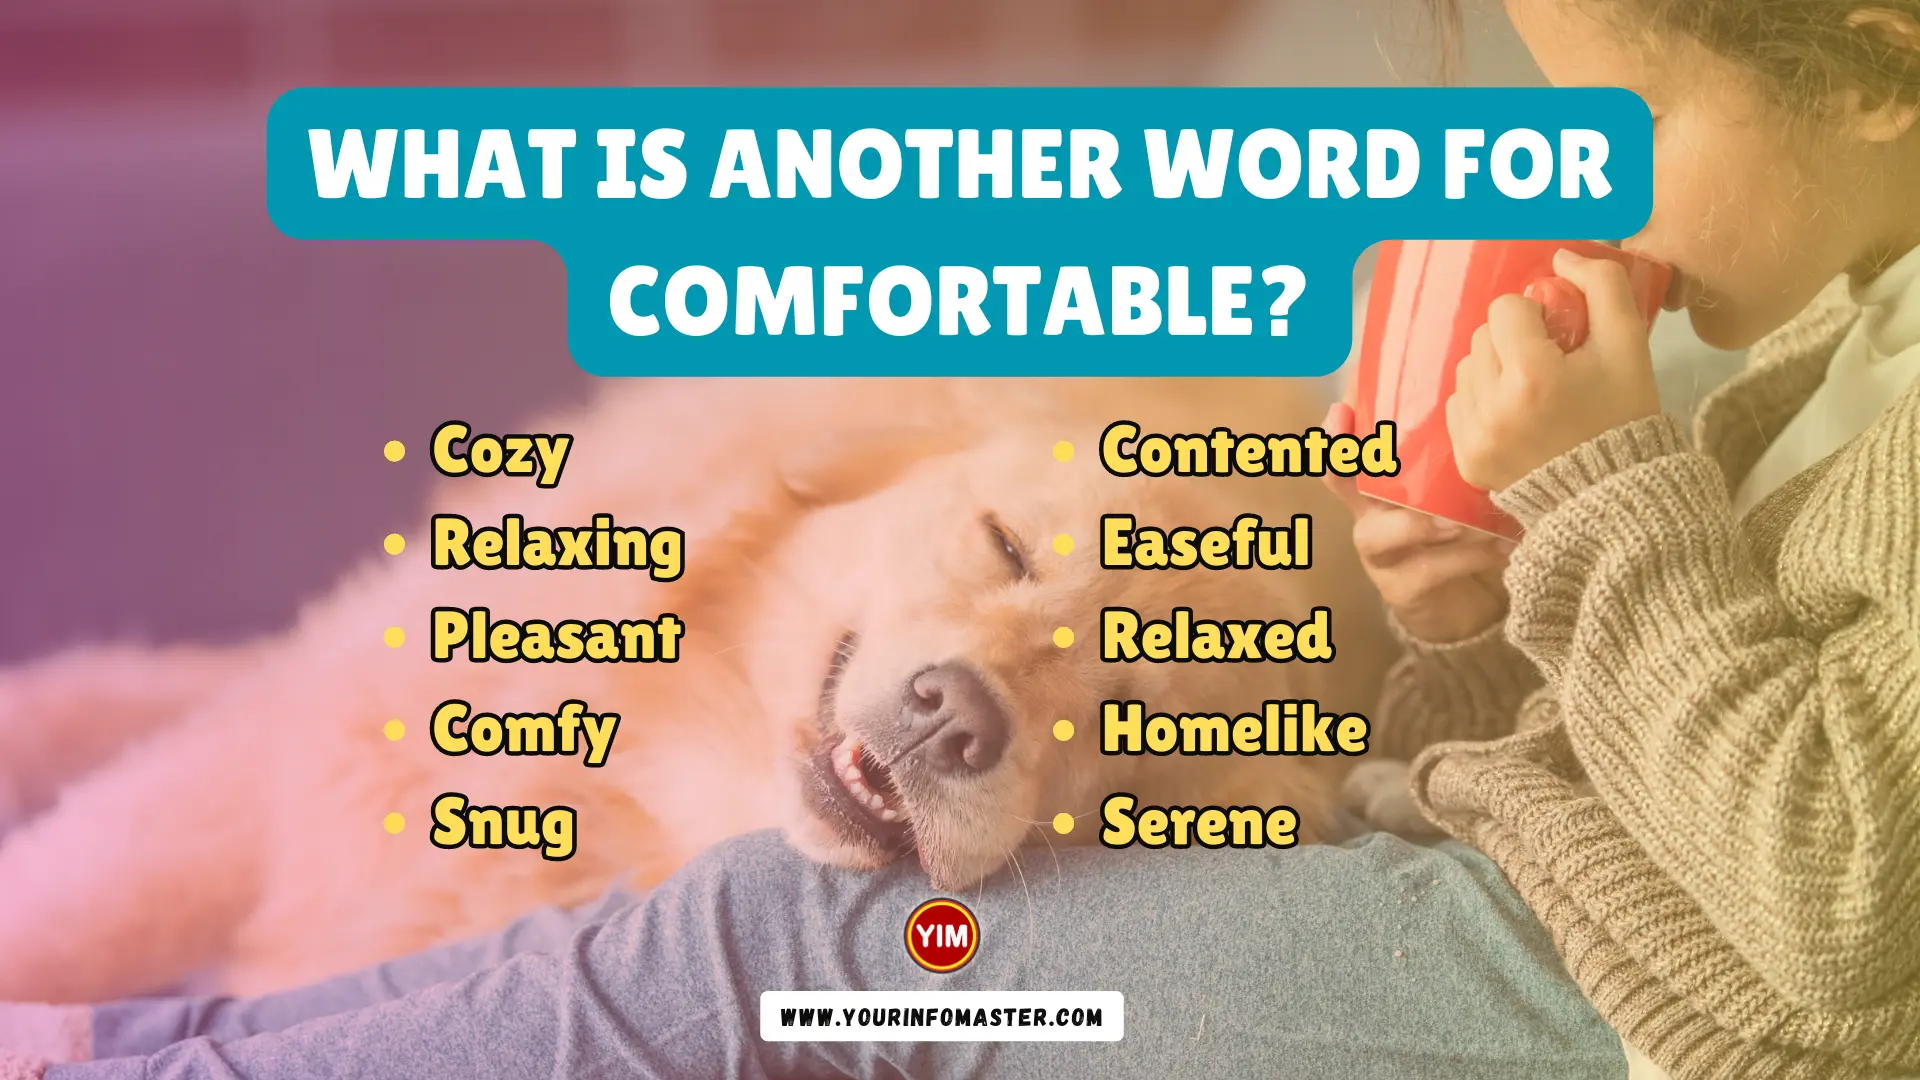 What is another word for Comfortable